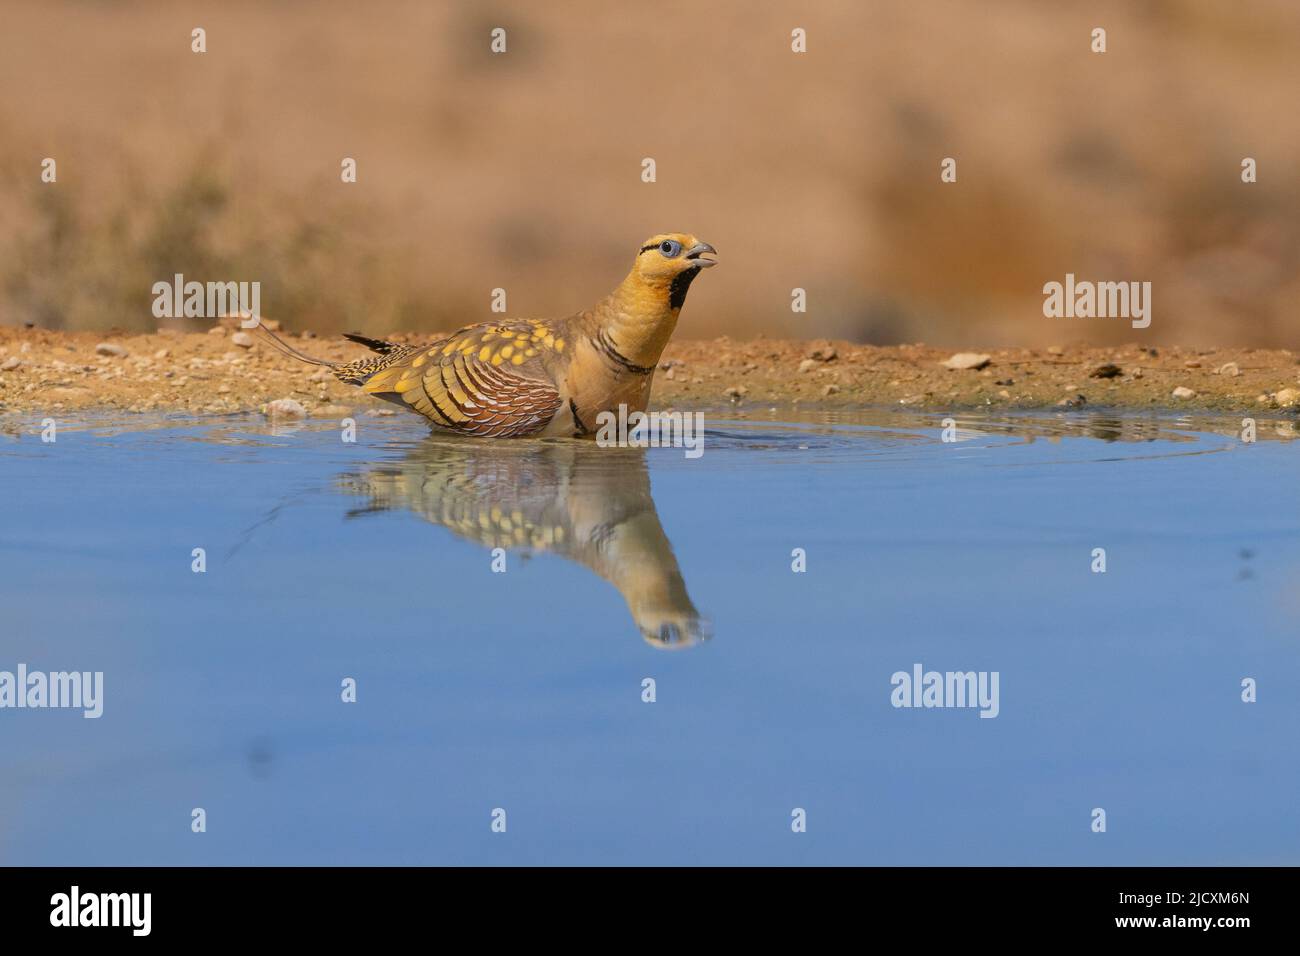 The pin-tailed sandgrouse (Pterocles alchata) is a medium large bird in the sandgrouse family The pin-tailed sandgrouse breeds in North Africa and the Stock Photo